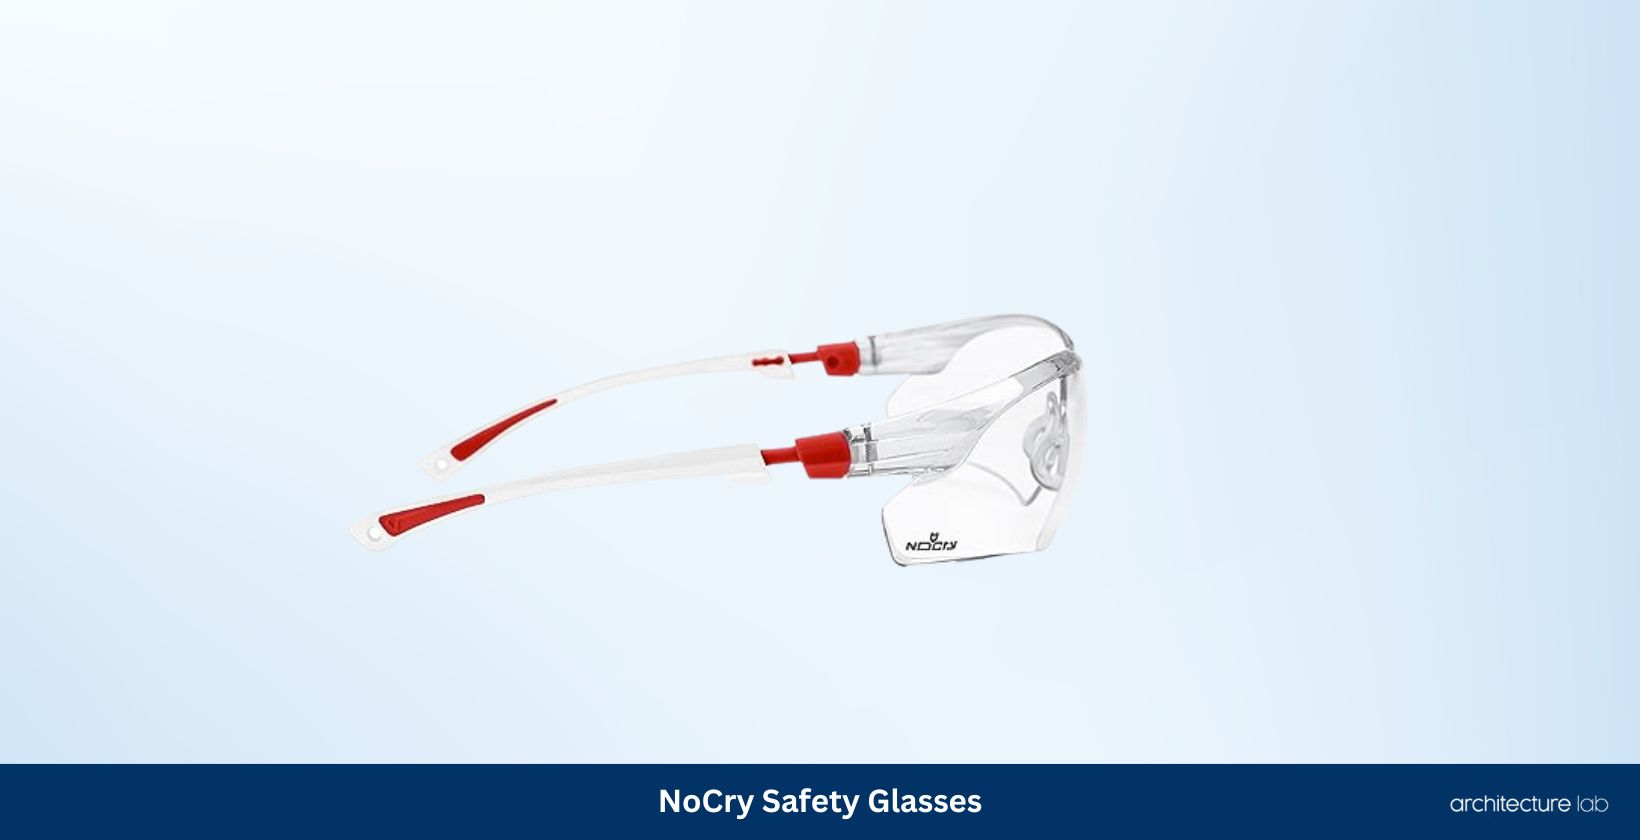 Nocry safety glasses scratch resistant wrap around lenses